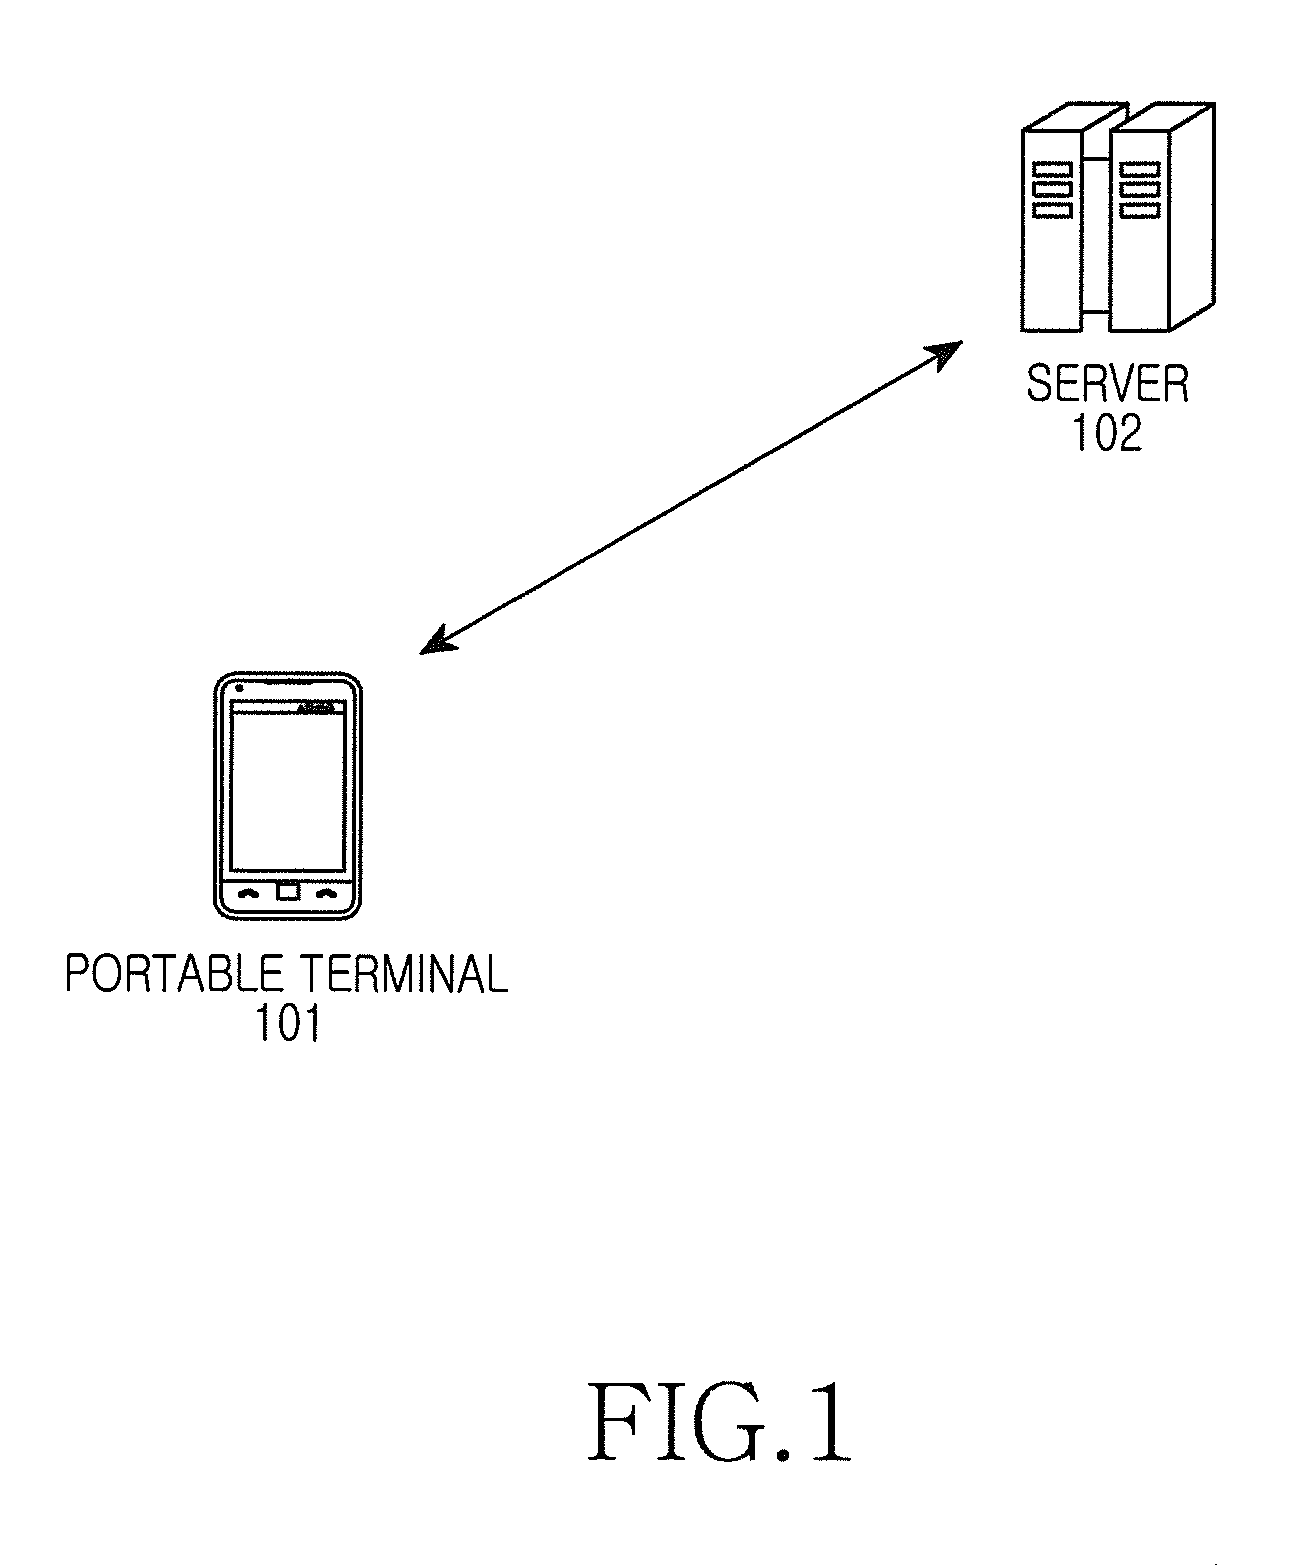 Apparatus and method for determining duplication of content in portable terminal